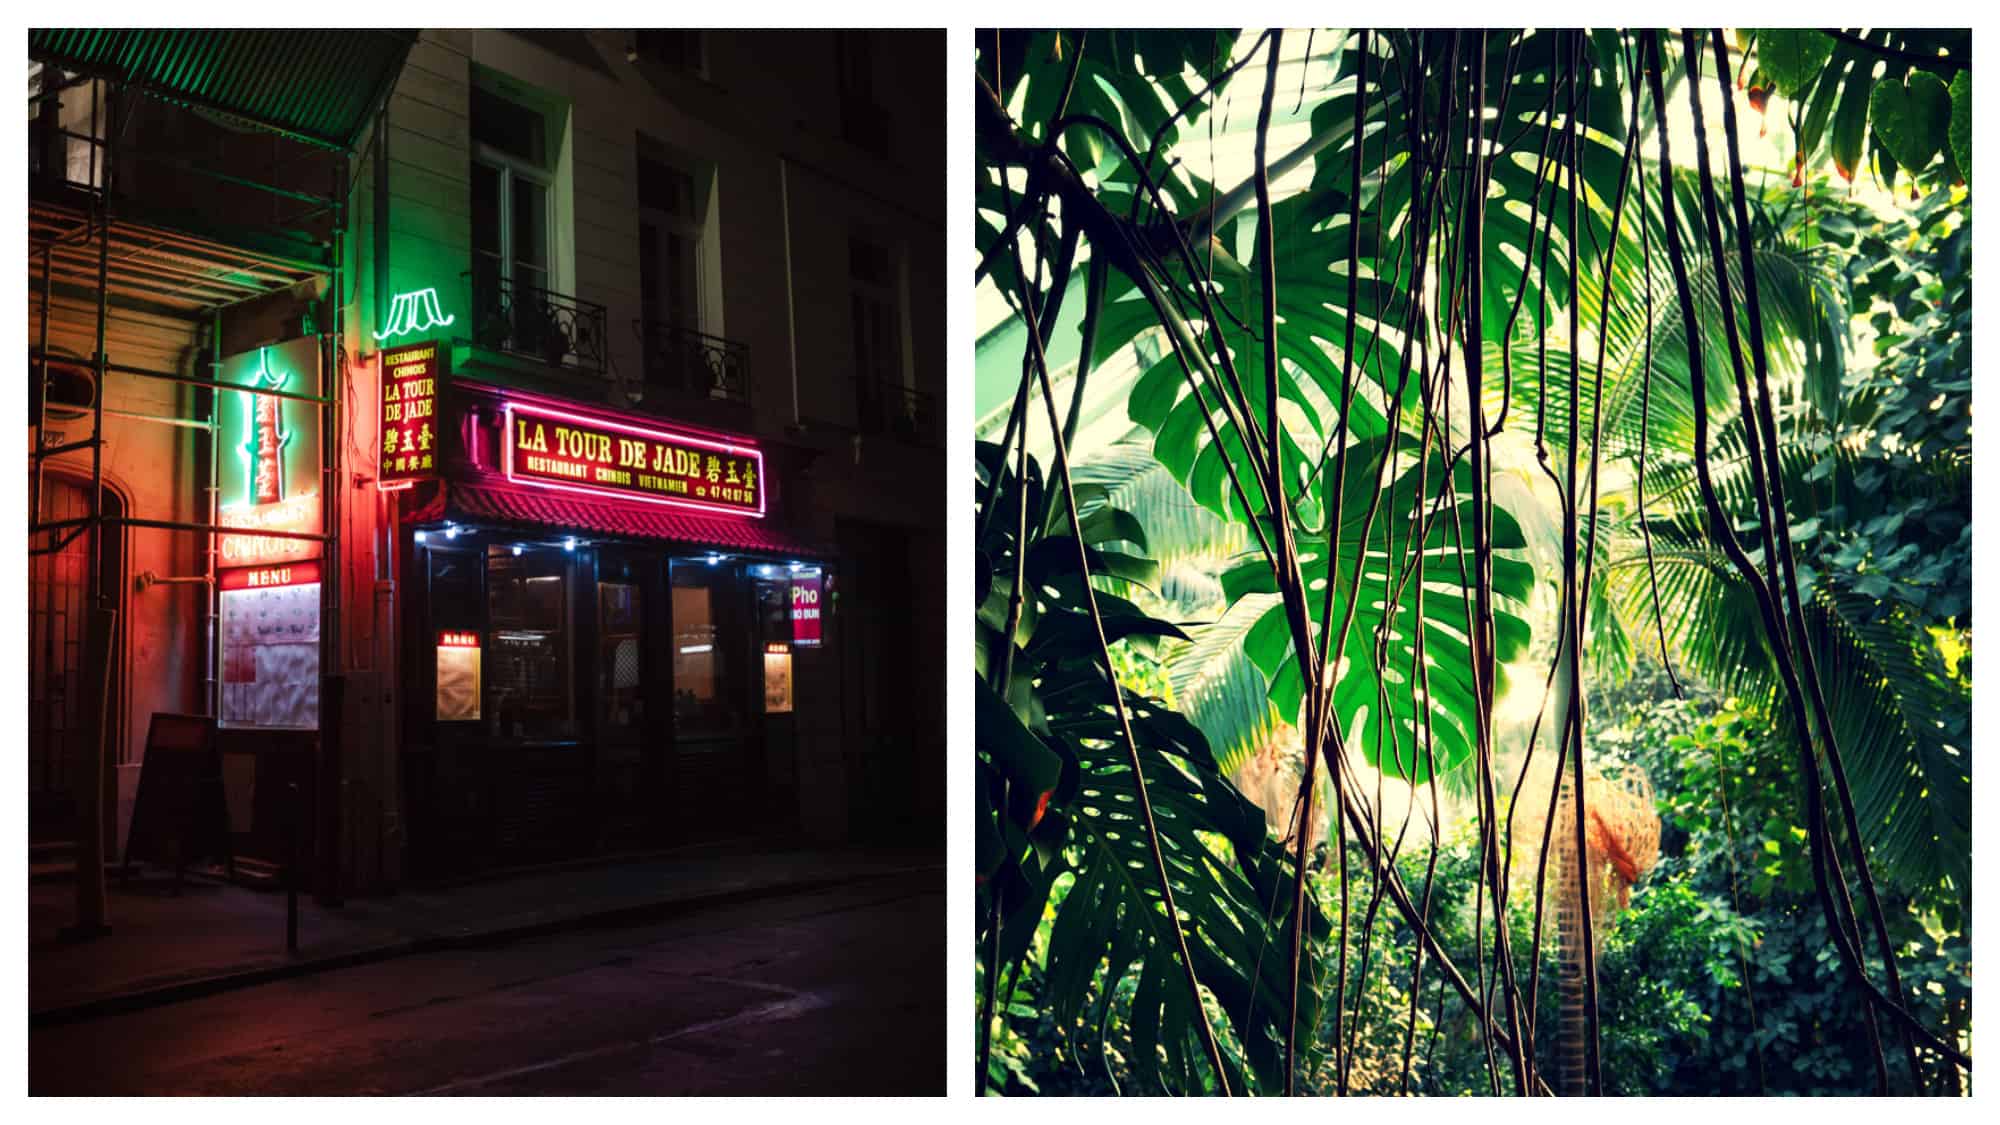 Left: Neon signs from the restaurant "La Tour de Jade" shine bright in the night in Paris' Chinatown, Right: Sun shines from above and illuminates the colors of the plants in the greenhouse of the Jardin de Plantes in Paris